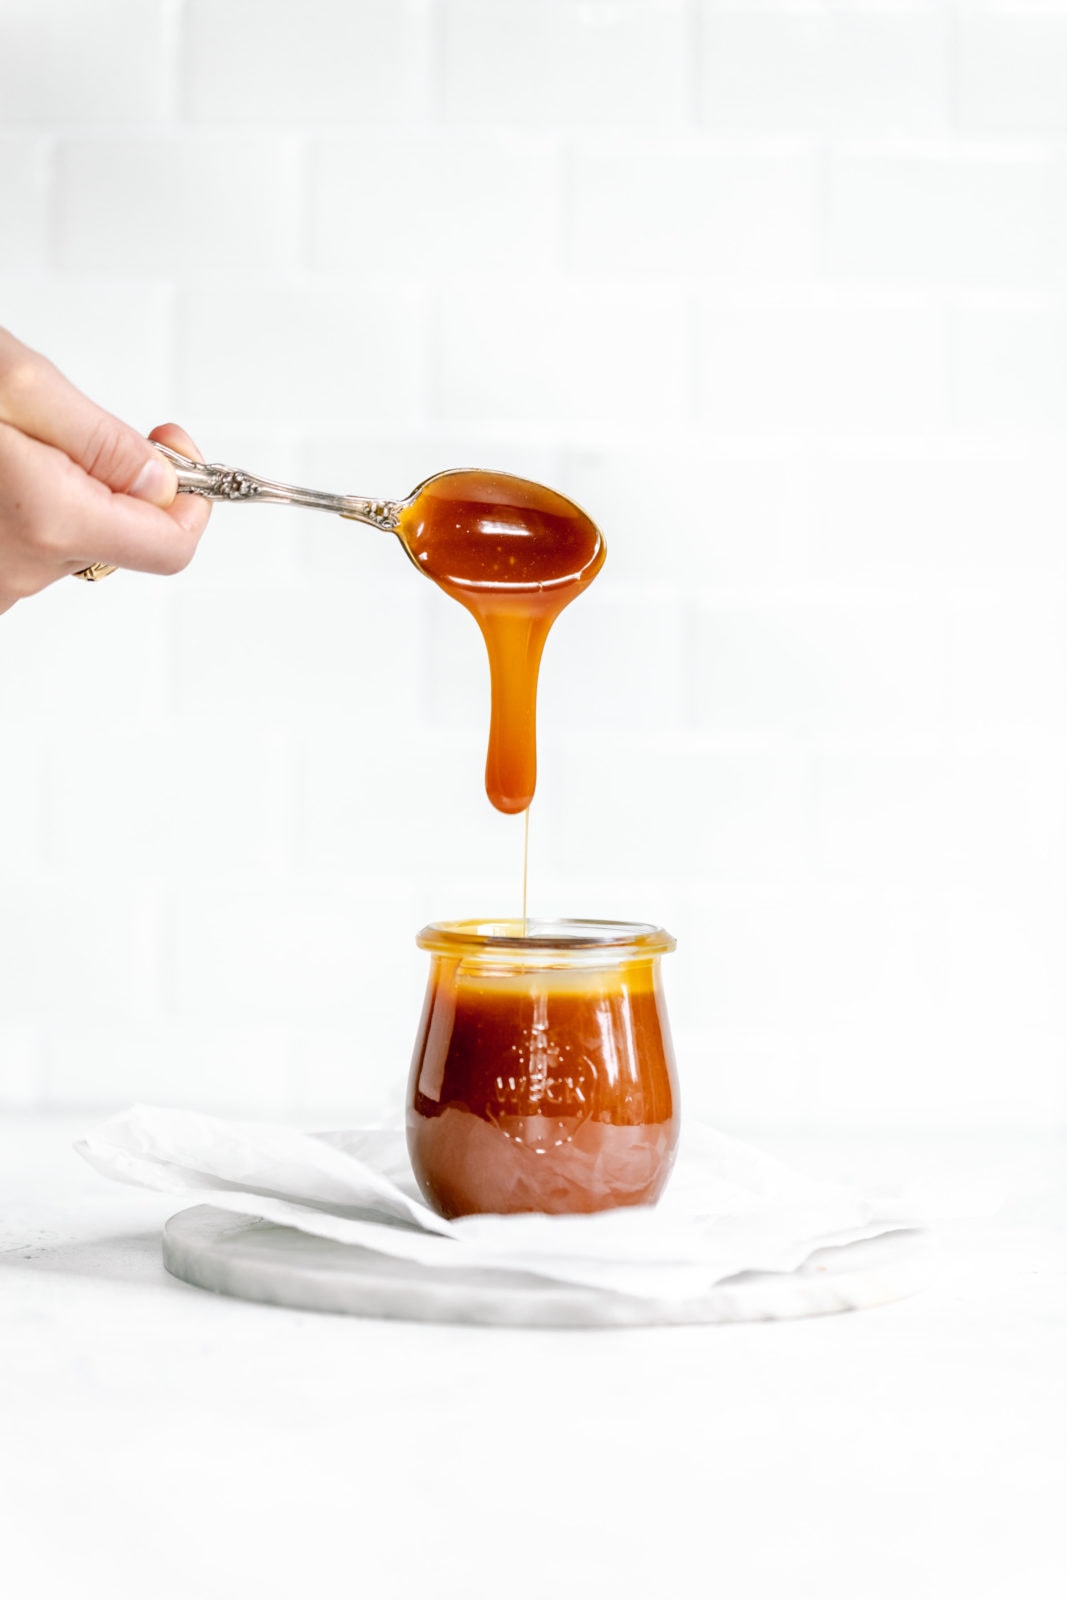 salted caramel dripping off spoon in to a jar